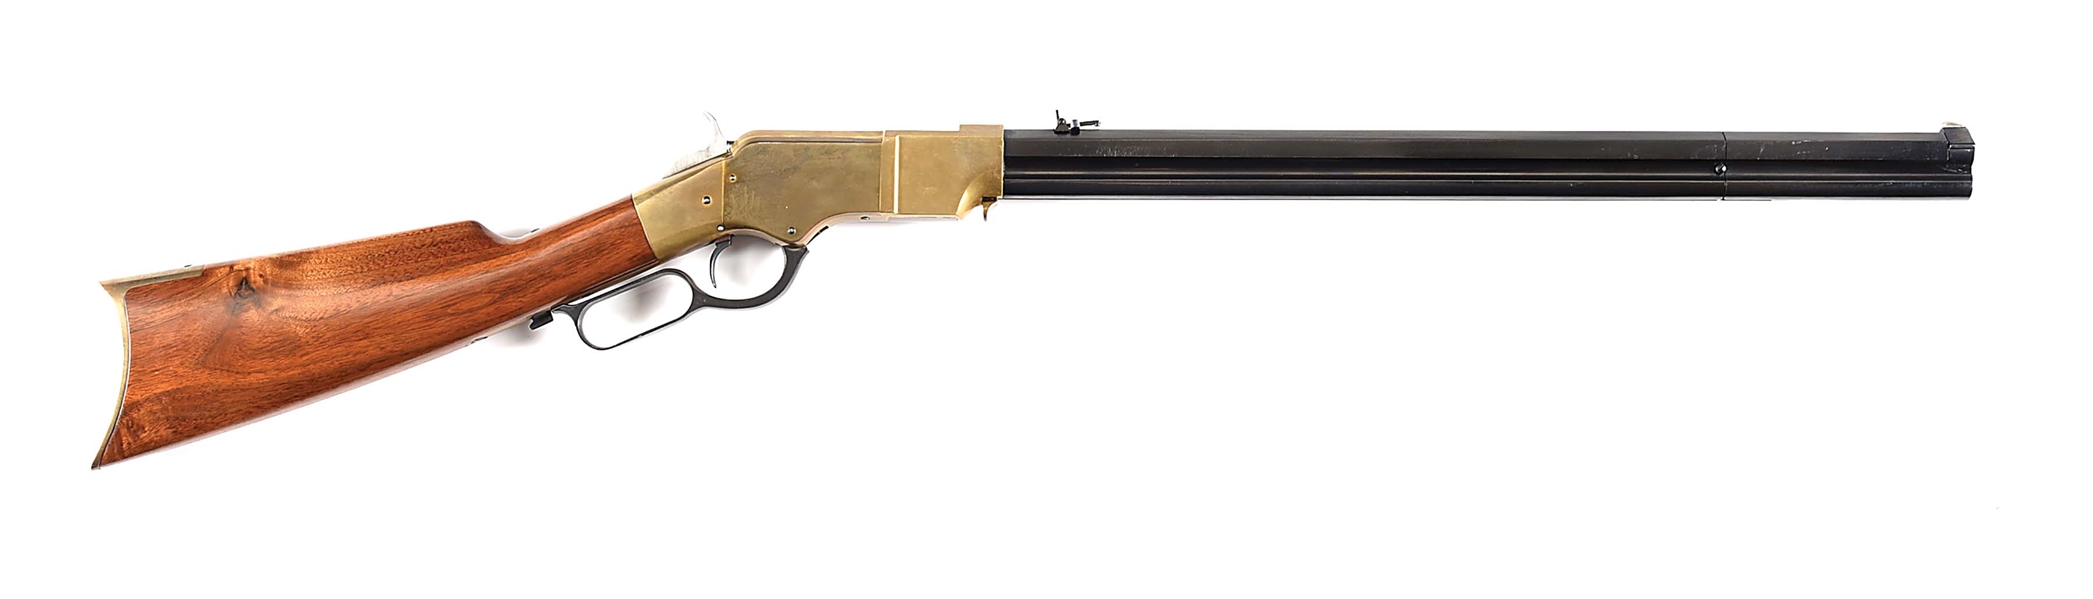 (M) NAVY ARMS HENRY .44-40 LEVER ACTION RIFLE.